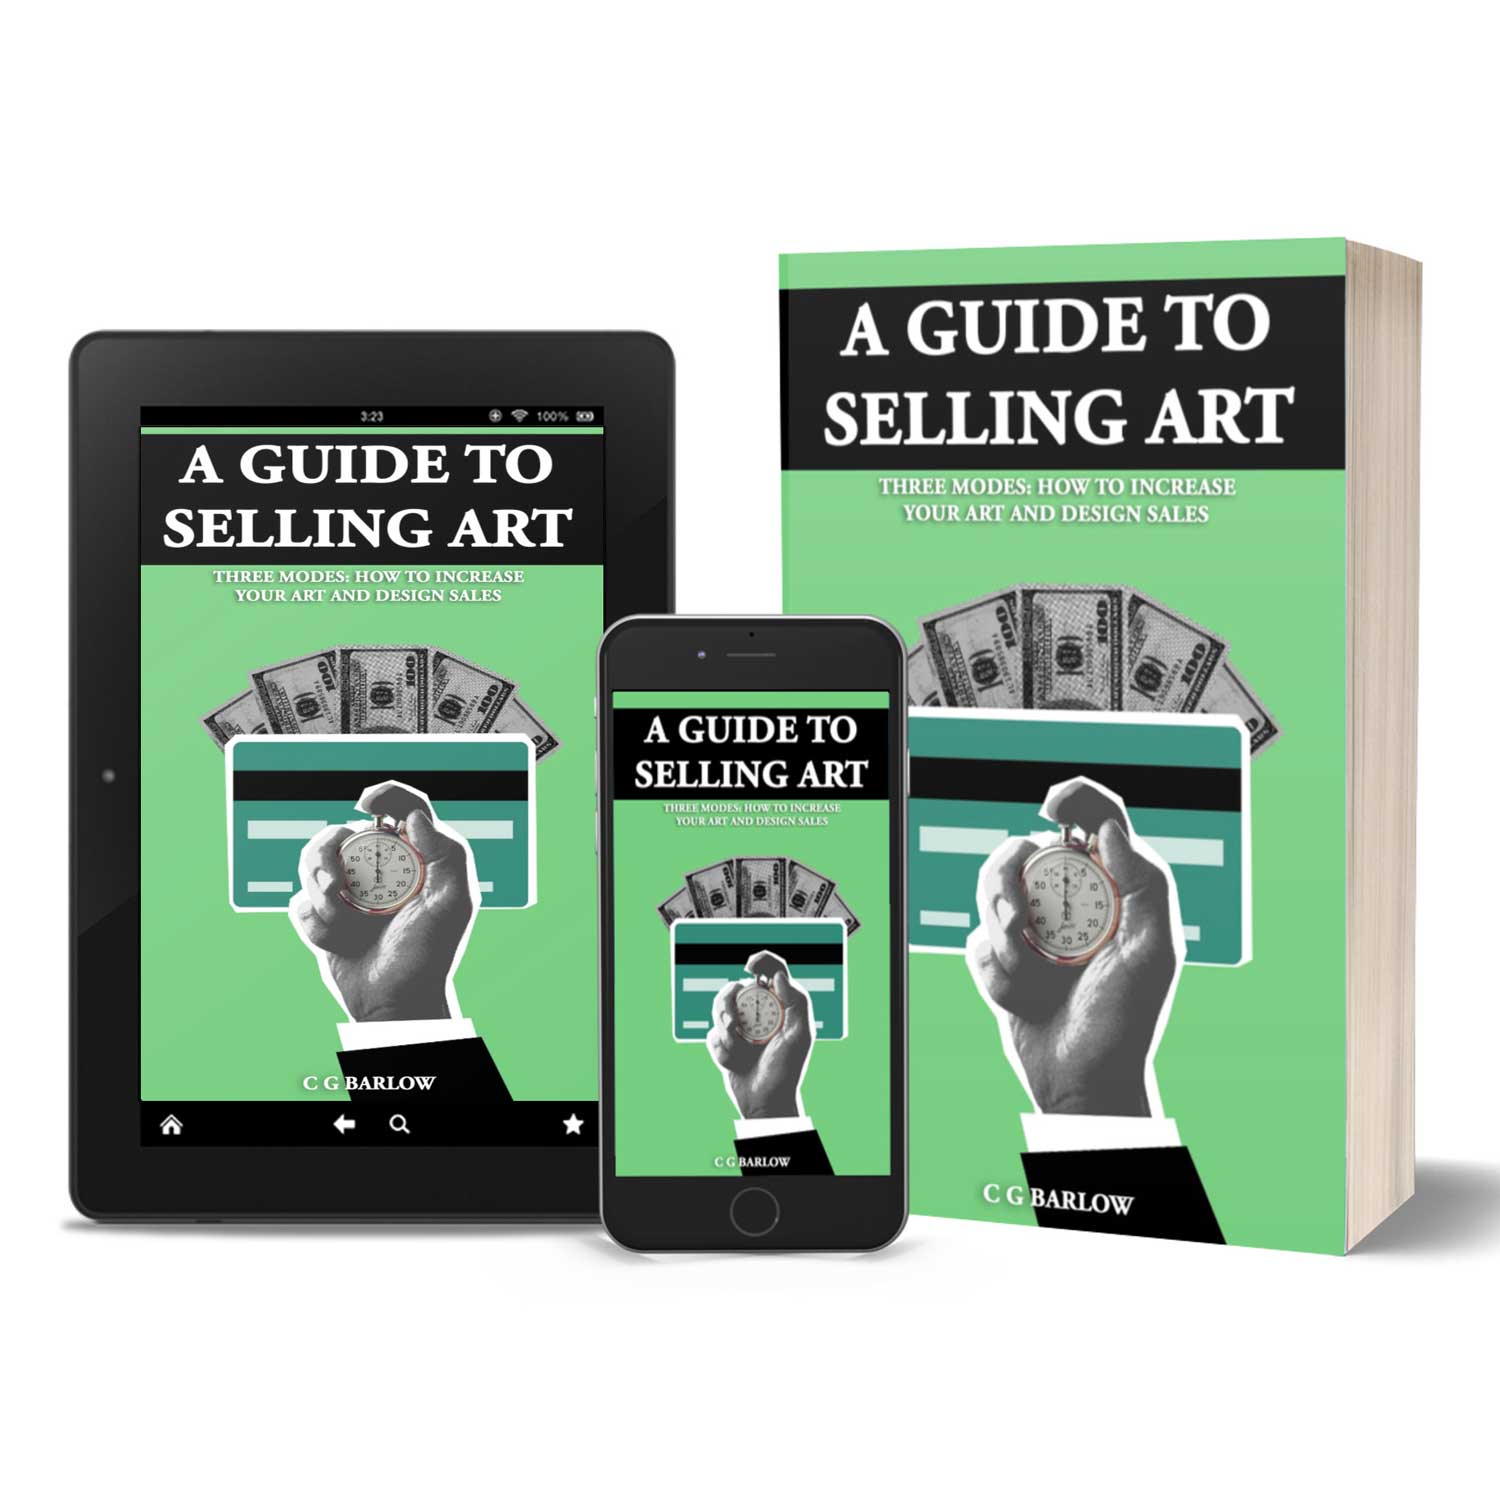 Guide to Selling Art [ebook]